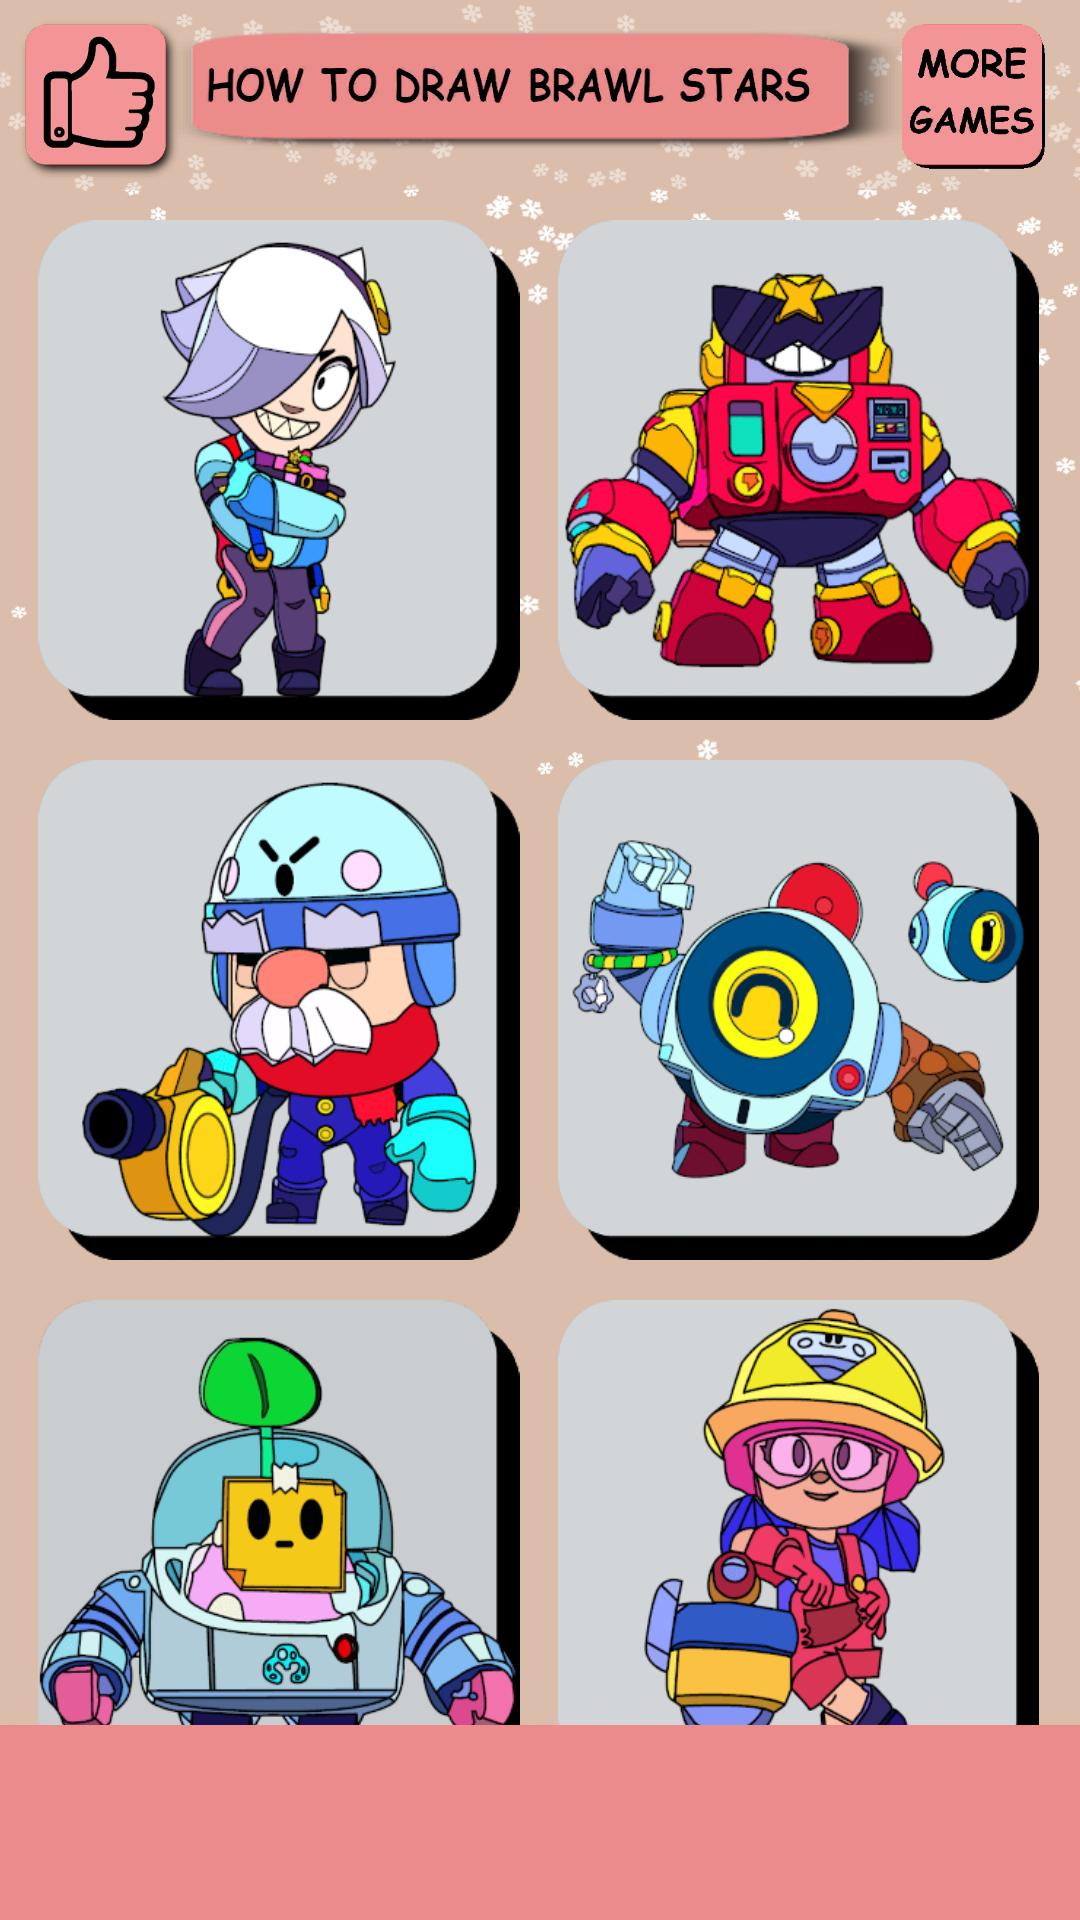 How To Draw Brawl Stars For Android Apk Download - brawl stars character drawing